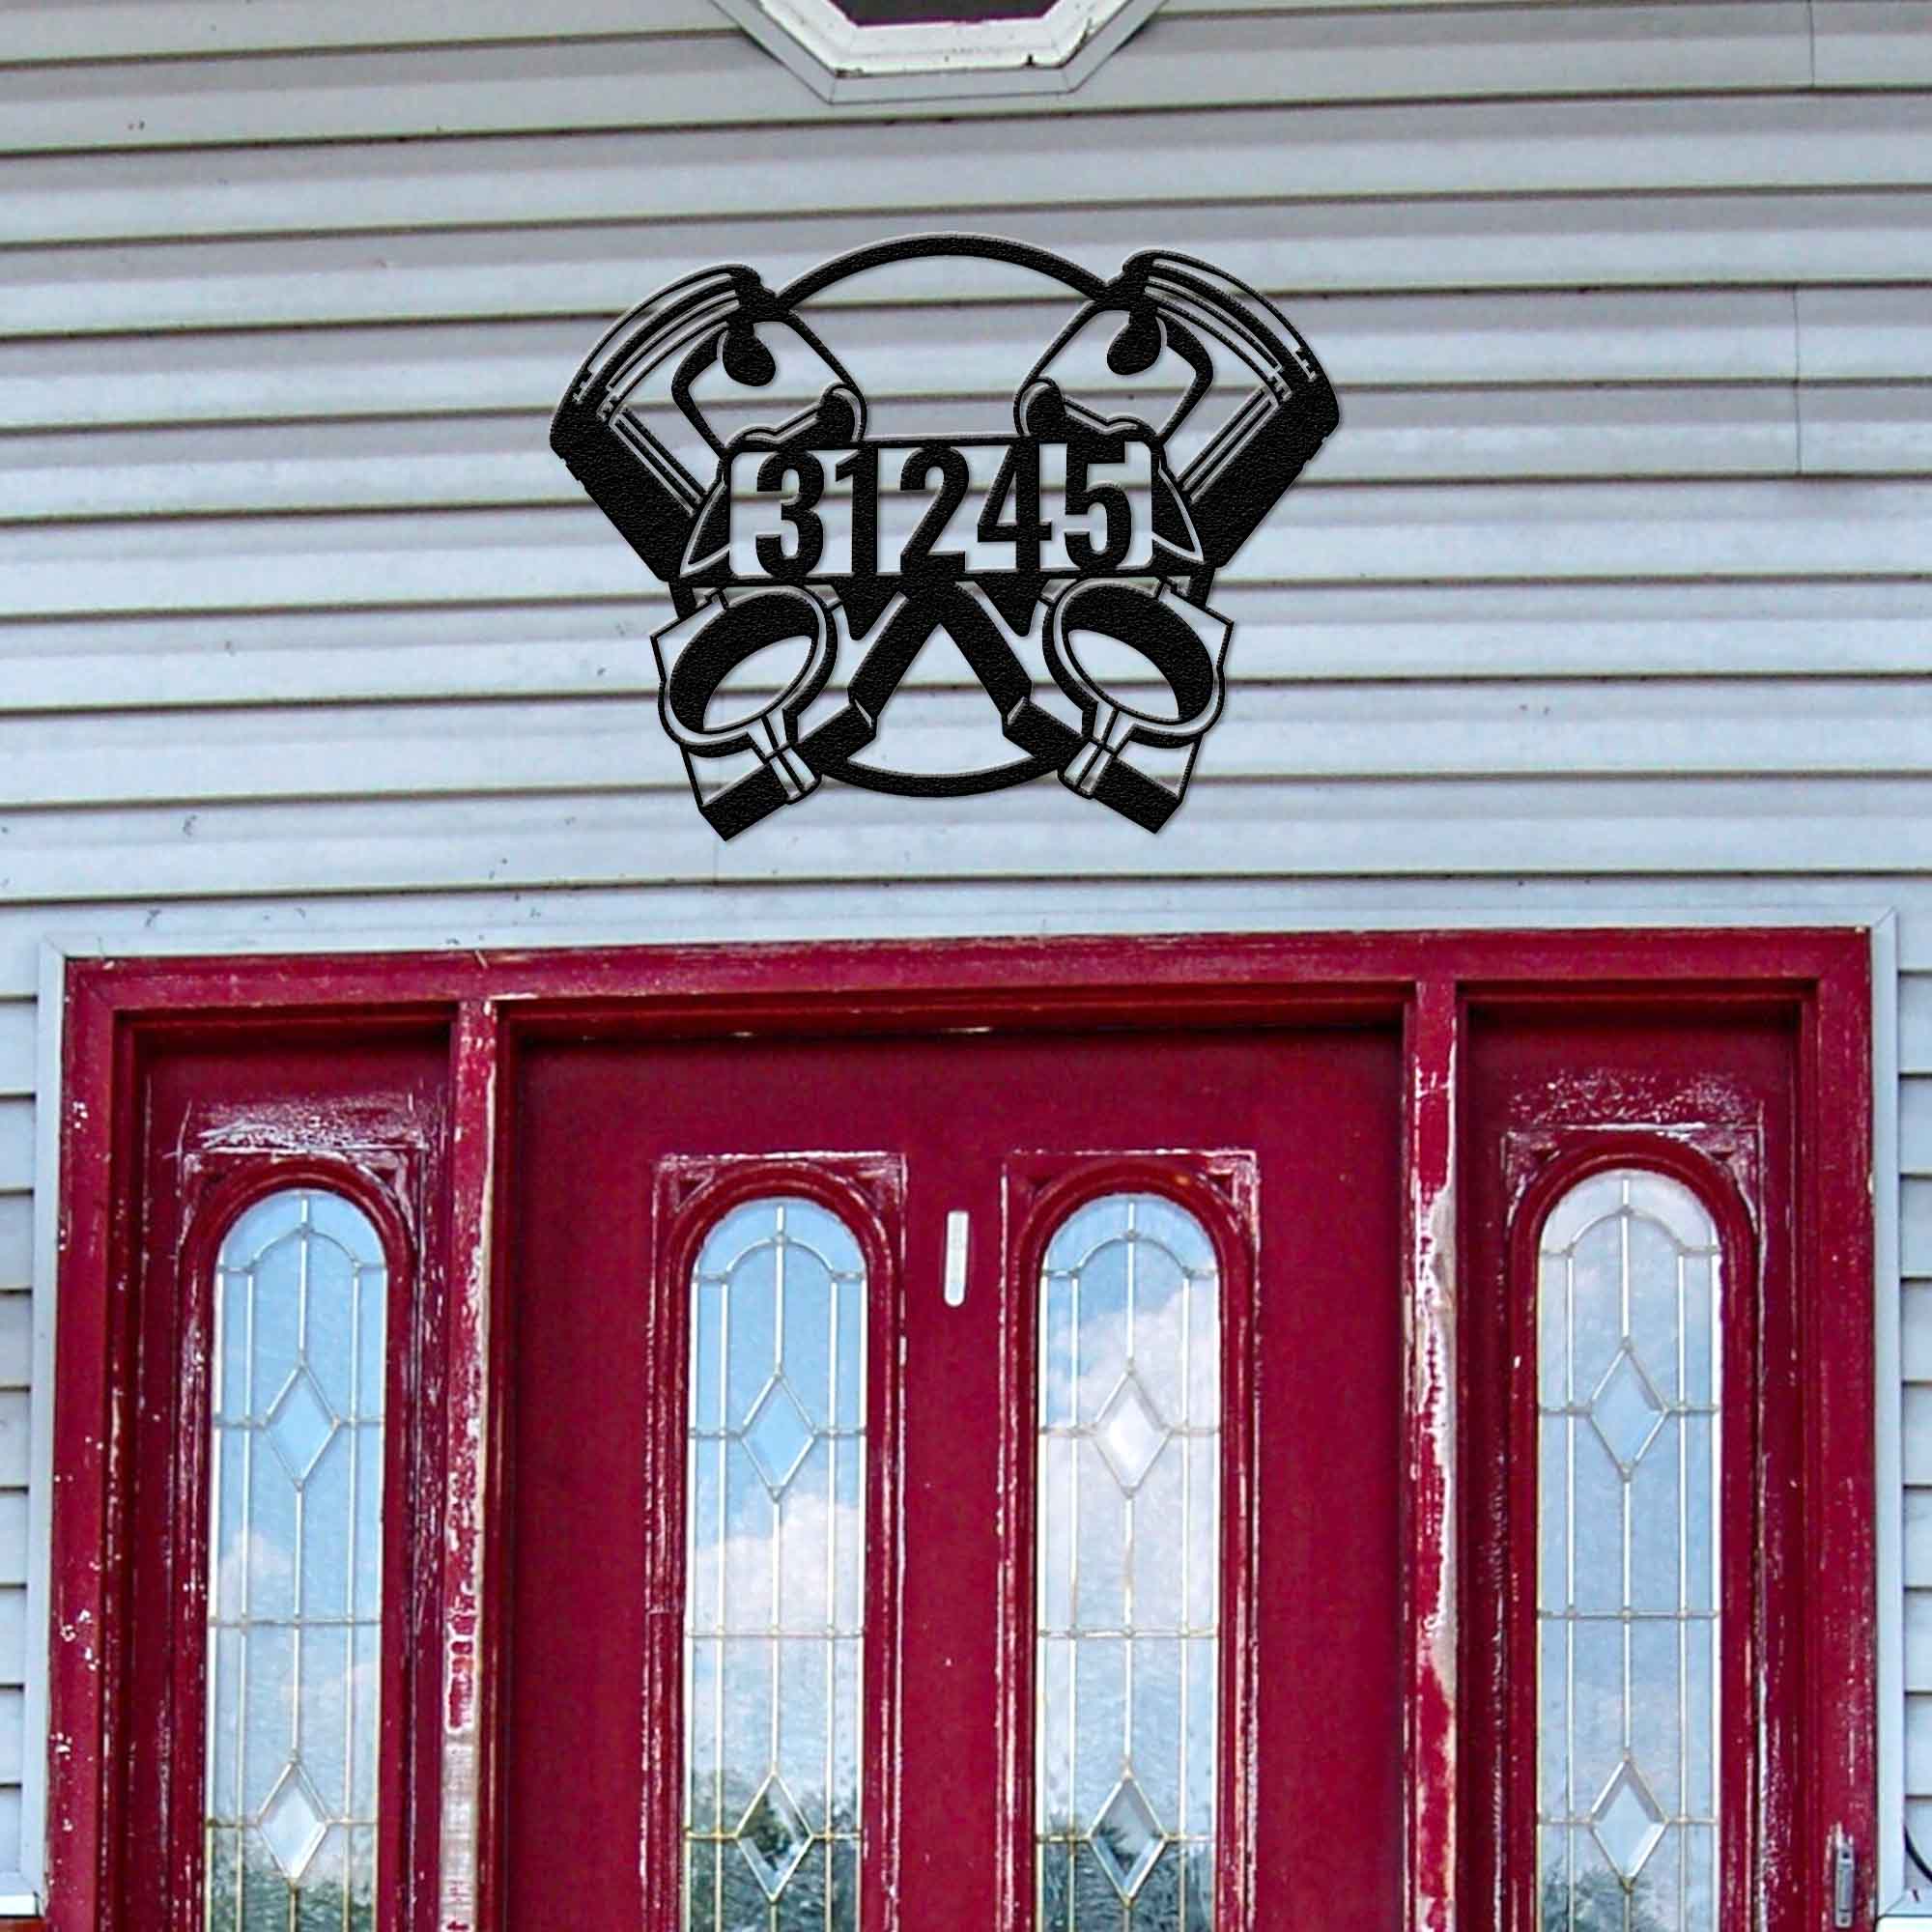 Cross Pistons - Personalized Metal Home Address Sign Metal Art - Throttle Mania